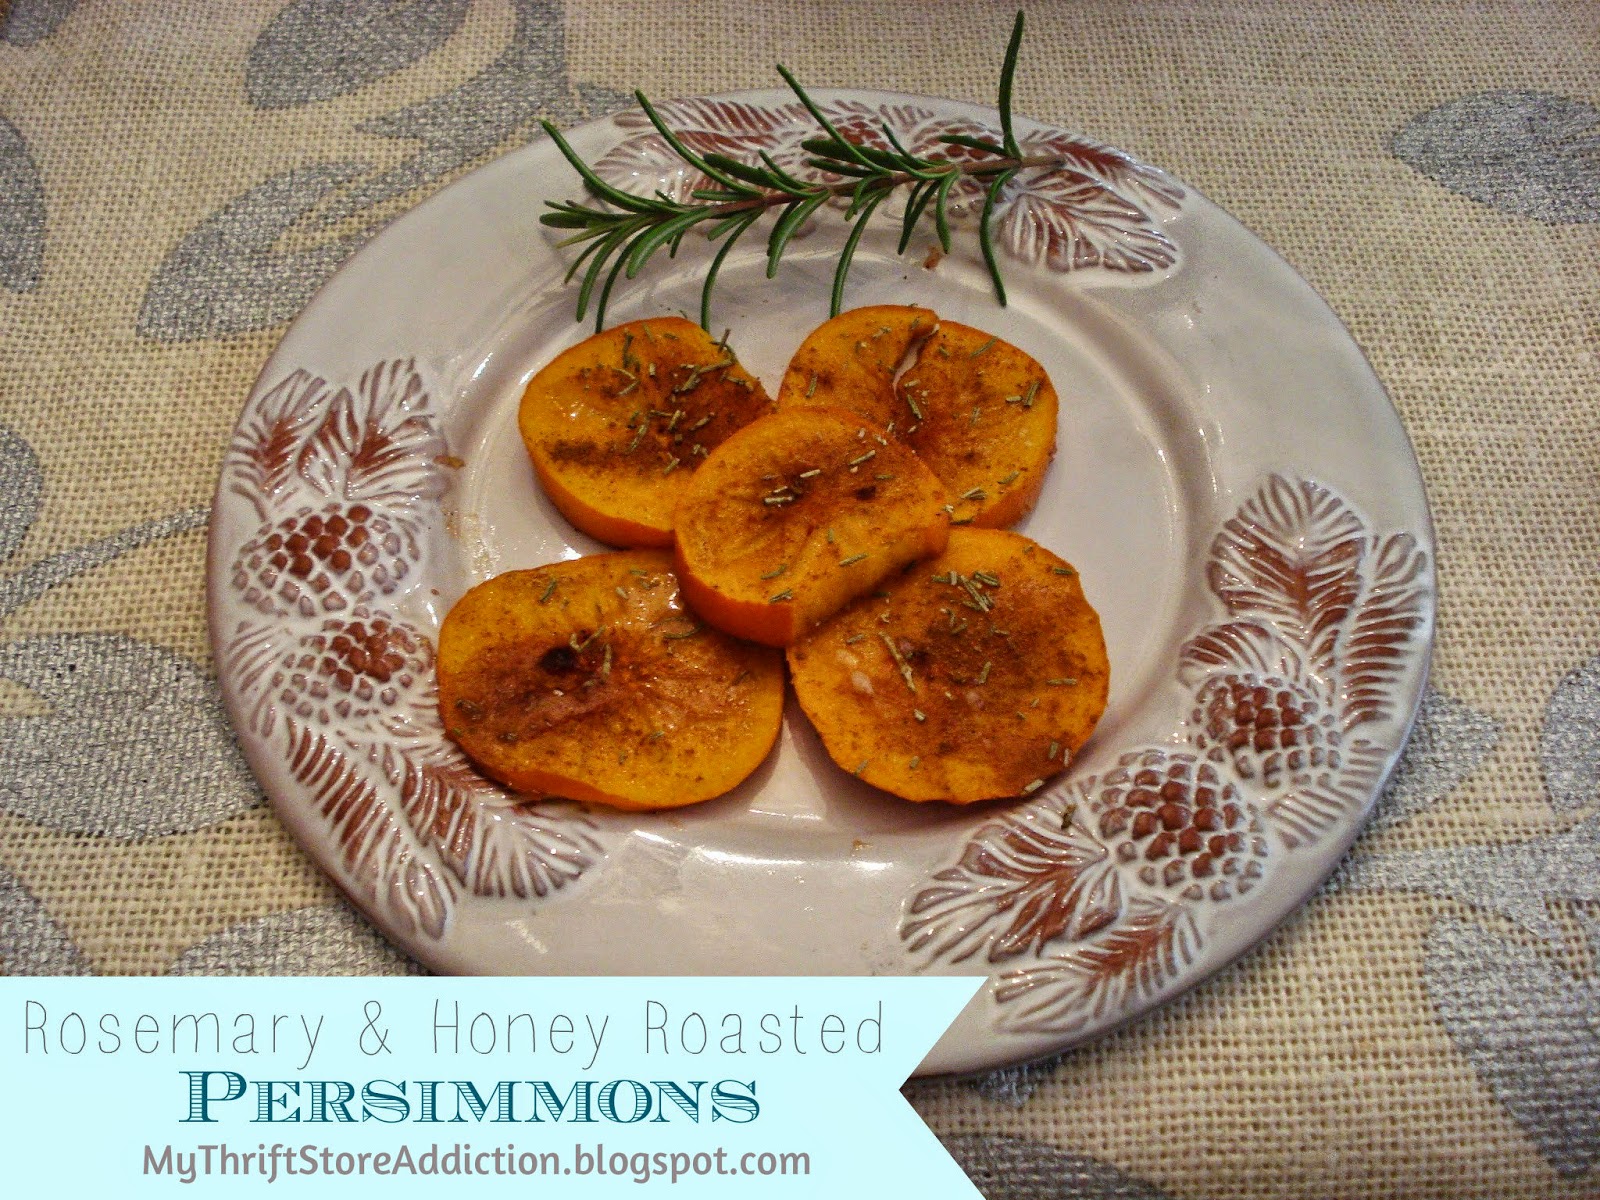 Rosemary and honey roasted persimmons